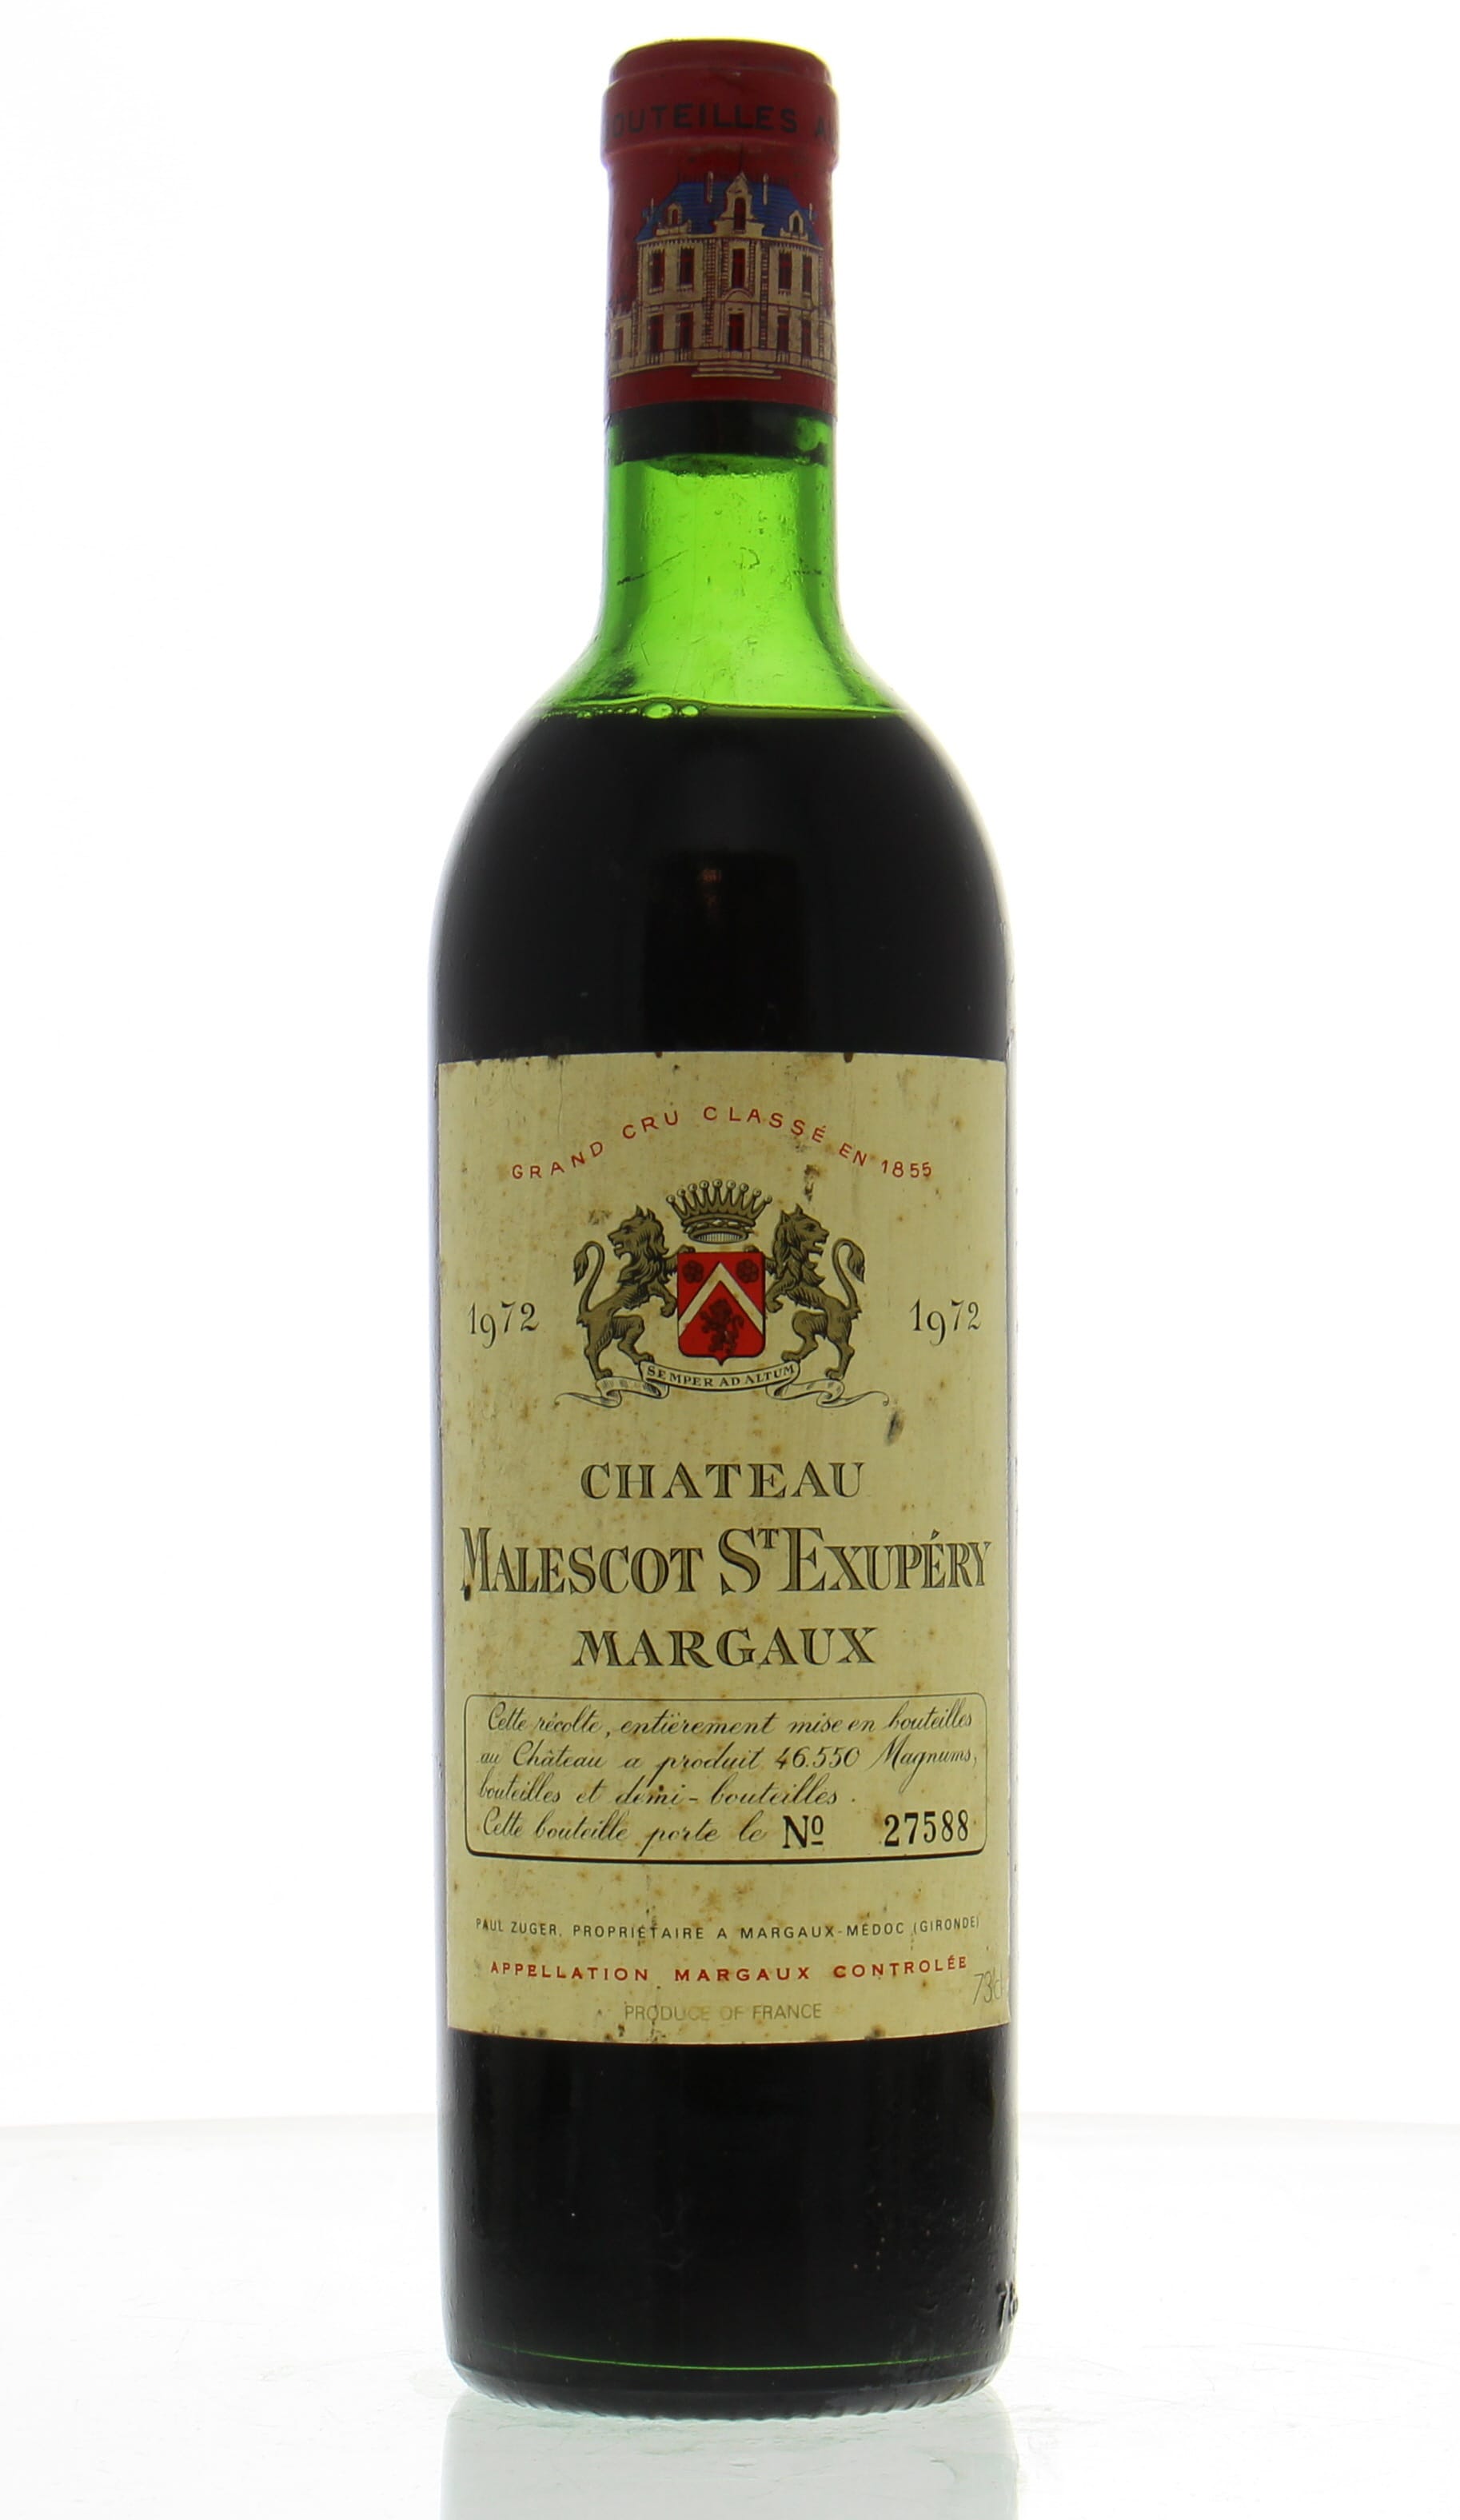 Chateau Malescot-St-Exupery - Chateau Malescot-St-Exupery 1972